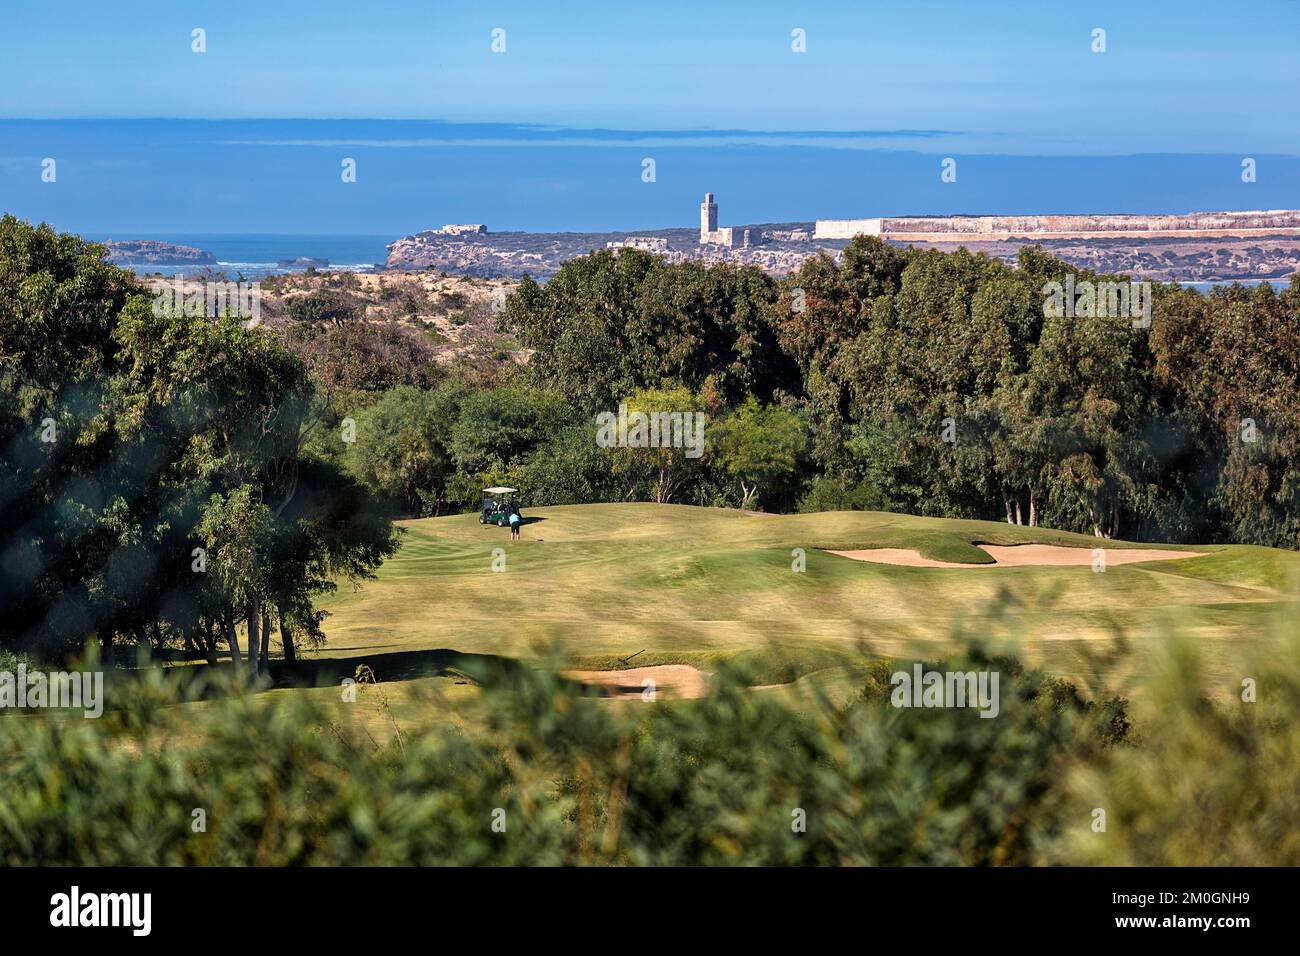 Tourist on golf course overlooking the sea and the ruins of Mogador Island, Diabat, Essaouira, Morocco, Africa Stock Photo